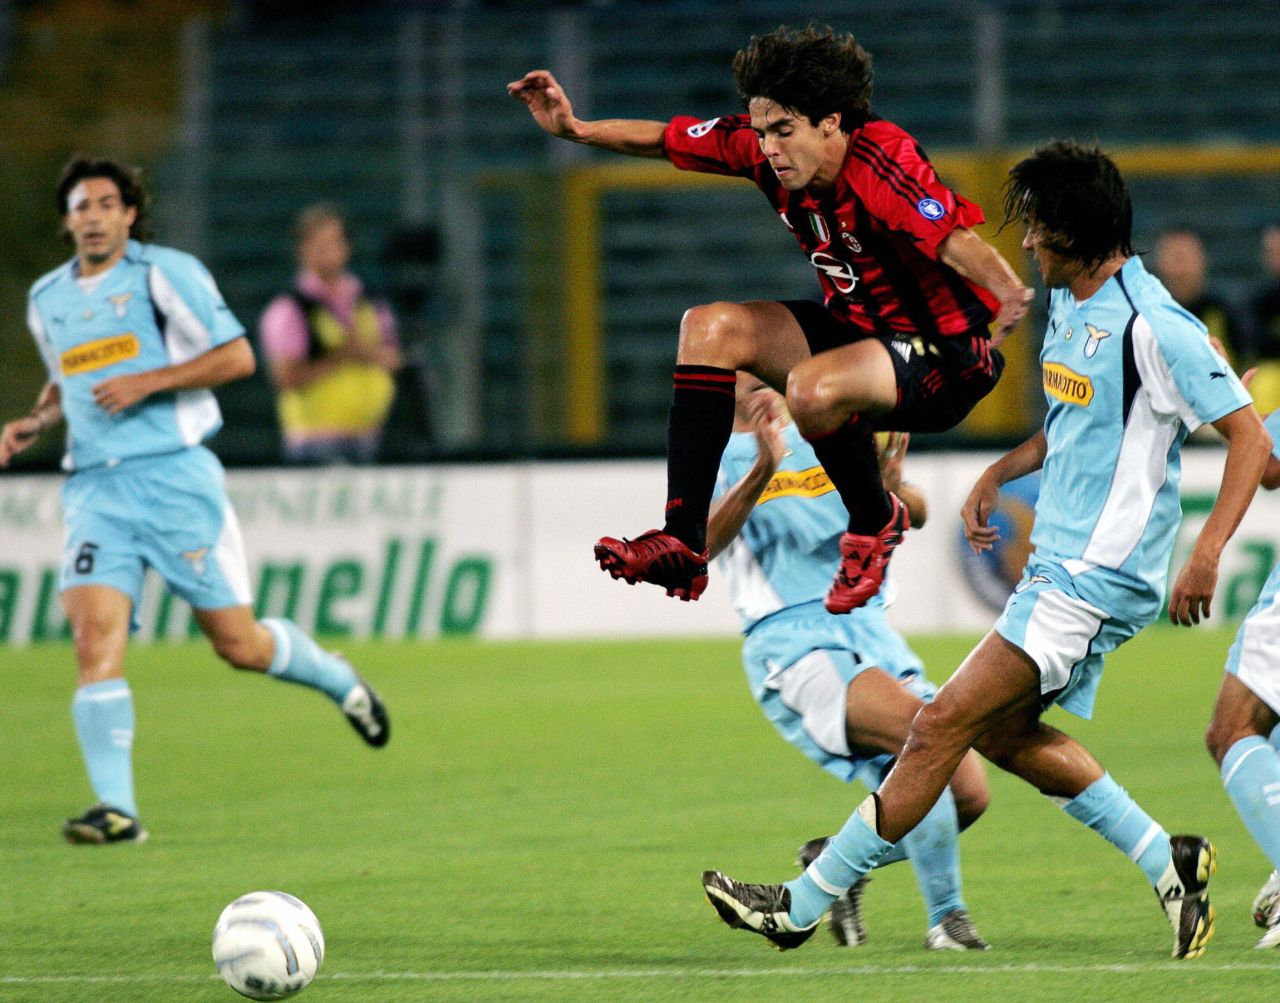 Kaka enjoyed the most successful spell of his career in Italy with AC Milan. While at the club he won the European Champions League as well as the domestic title.